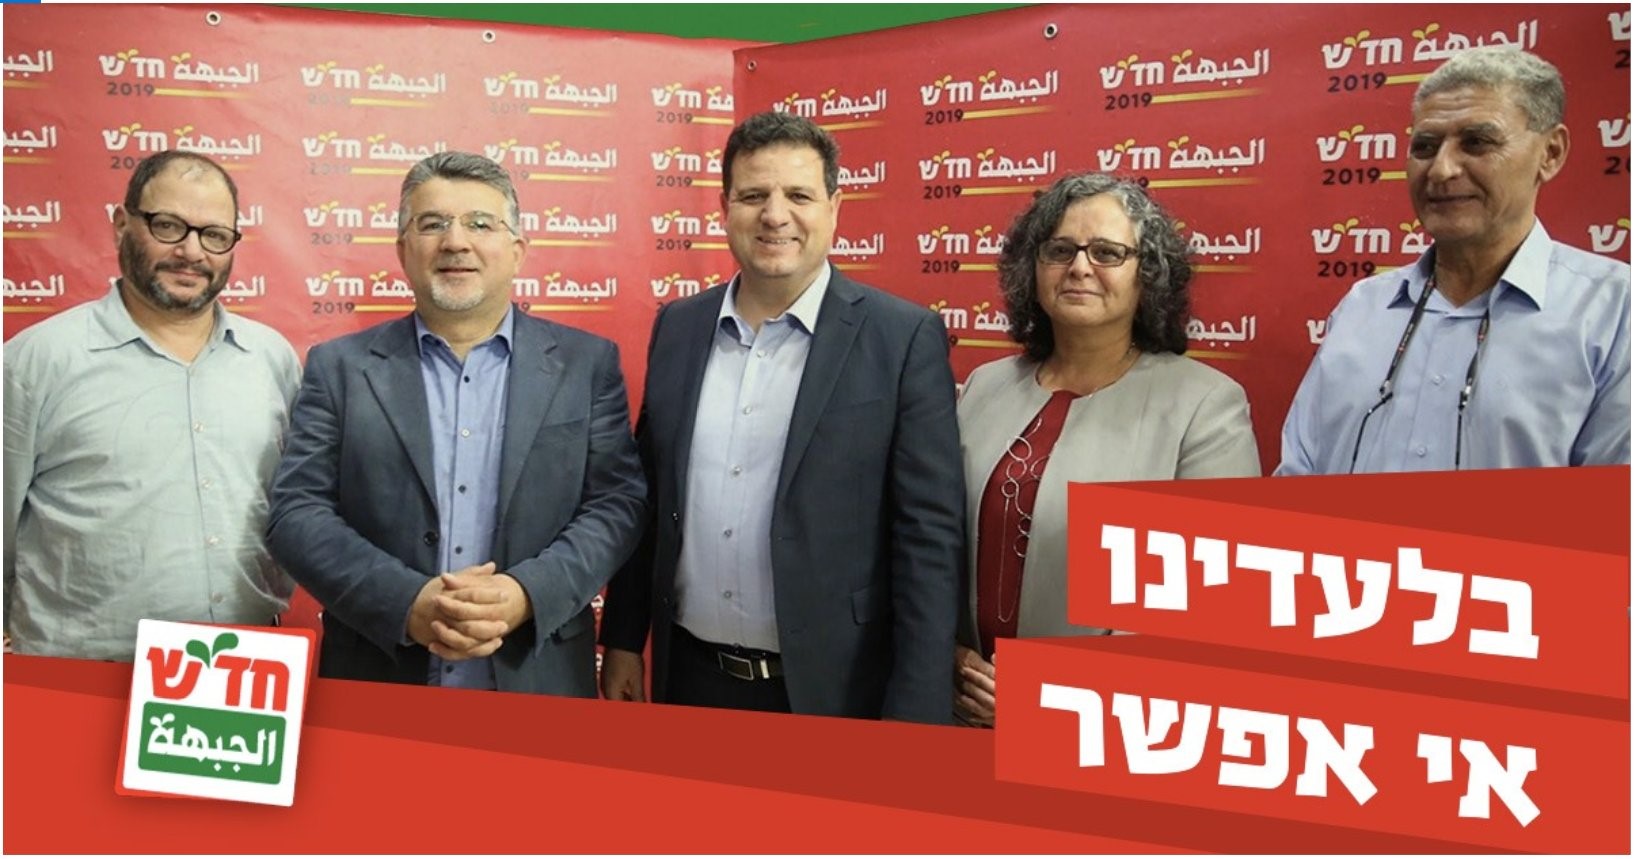 Hadash's first five candidates for the 24th Knesset at an electoral rally; all are currently MKs in the outgoing Knesset. From left to right they are: Ofer Cassif (#3), Youssef Jabareen (#4), Ayman Odeh (#1 – also head of the Joint List), Aida Touma-Sliman (#2), and Jabar Asakla (#5). "Without us it's not possible."